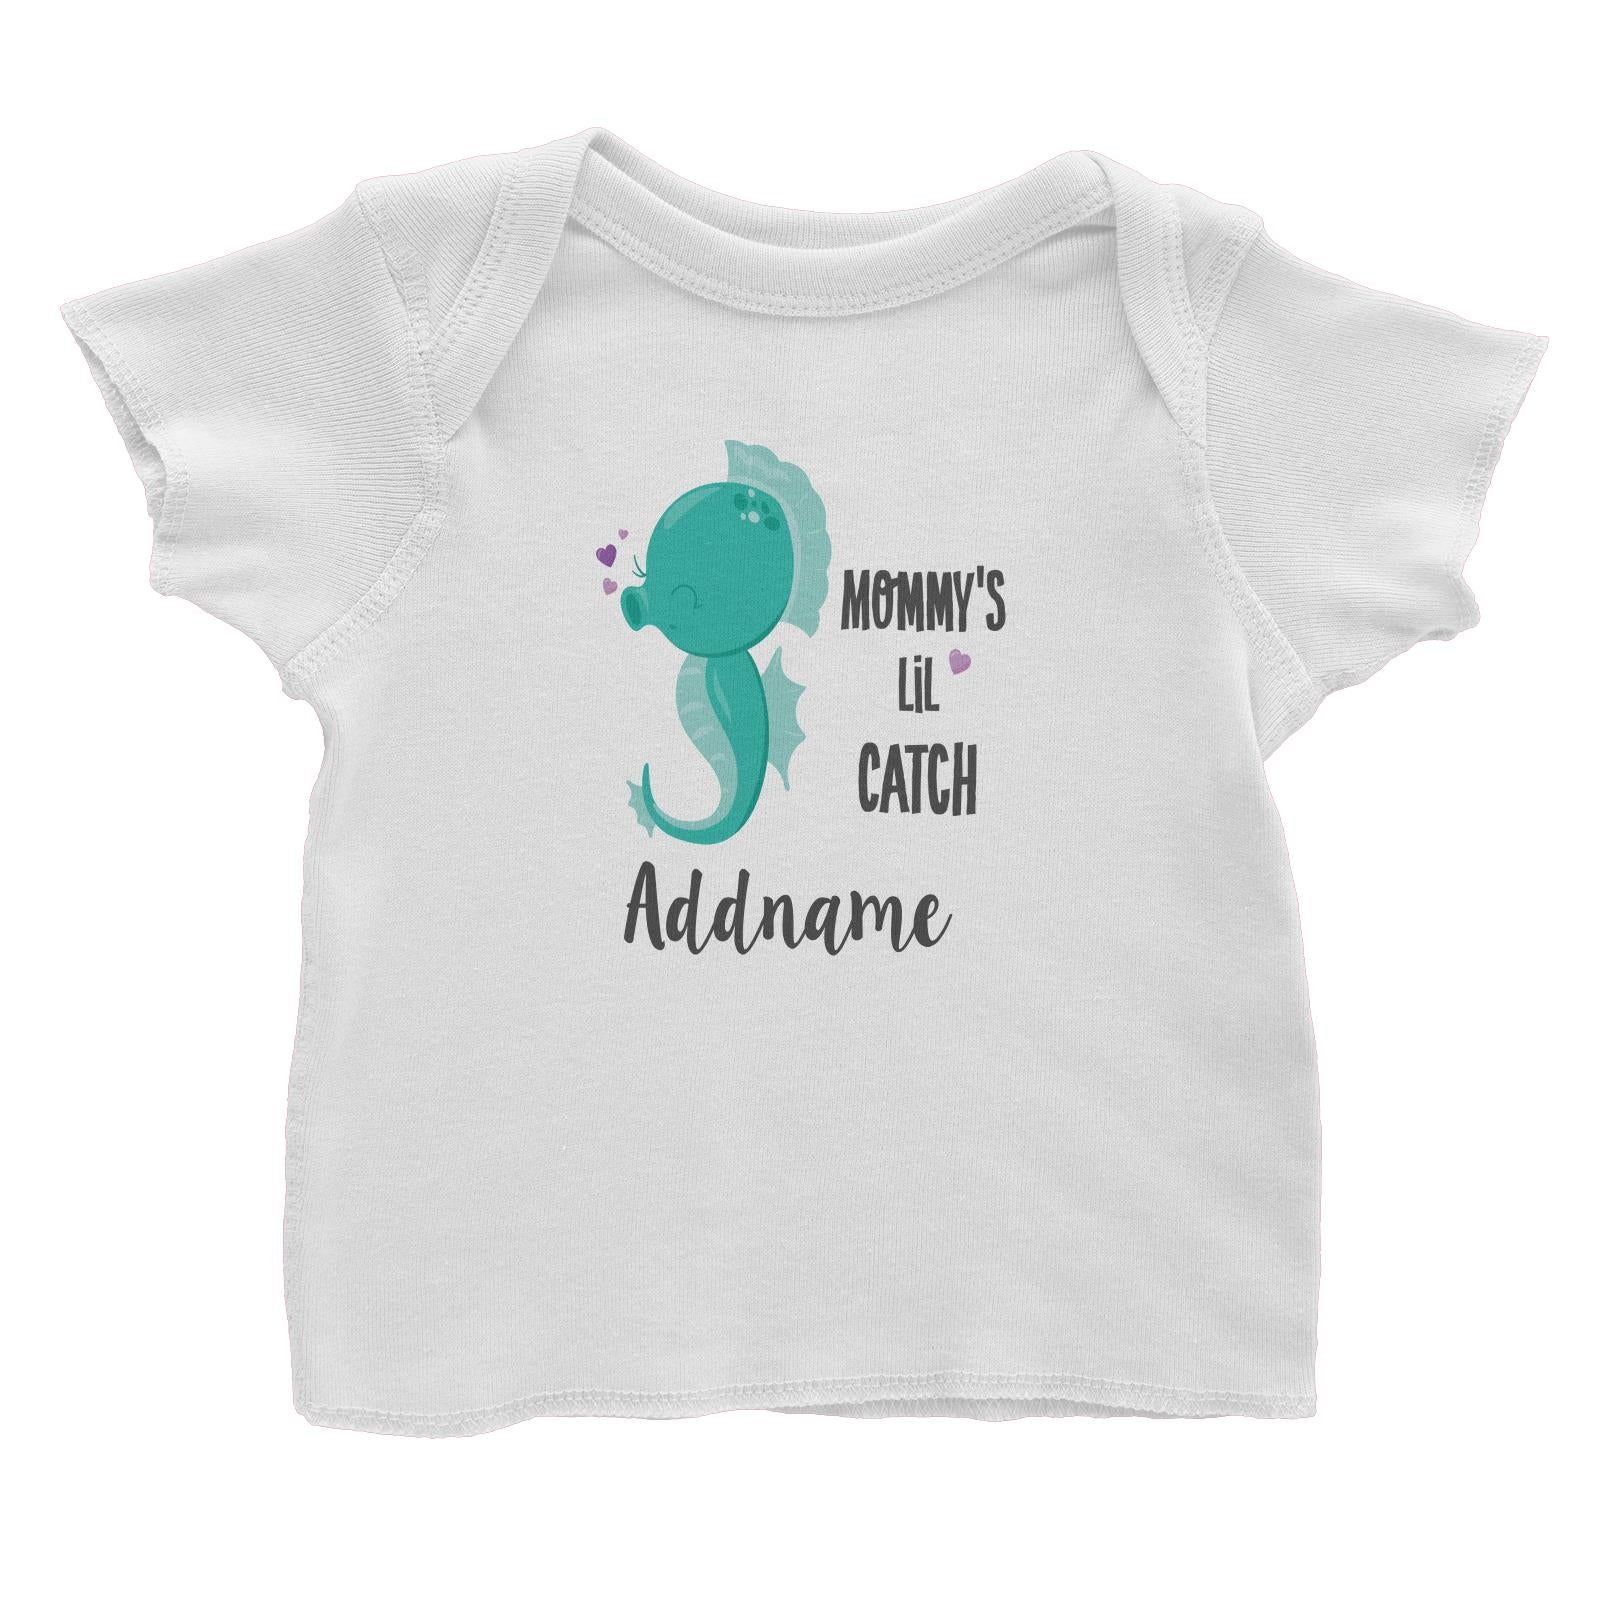 Cute Sea Animals Green Seahorse Mommy's Lil Catch Addname Baby T-Shirt